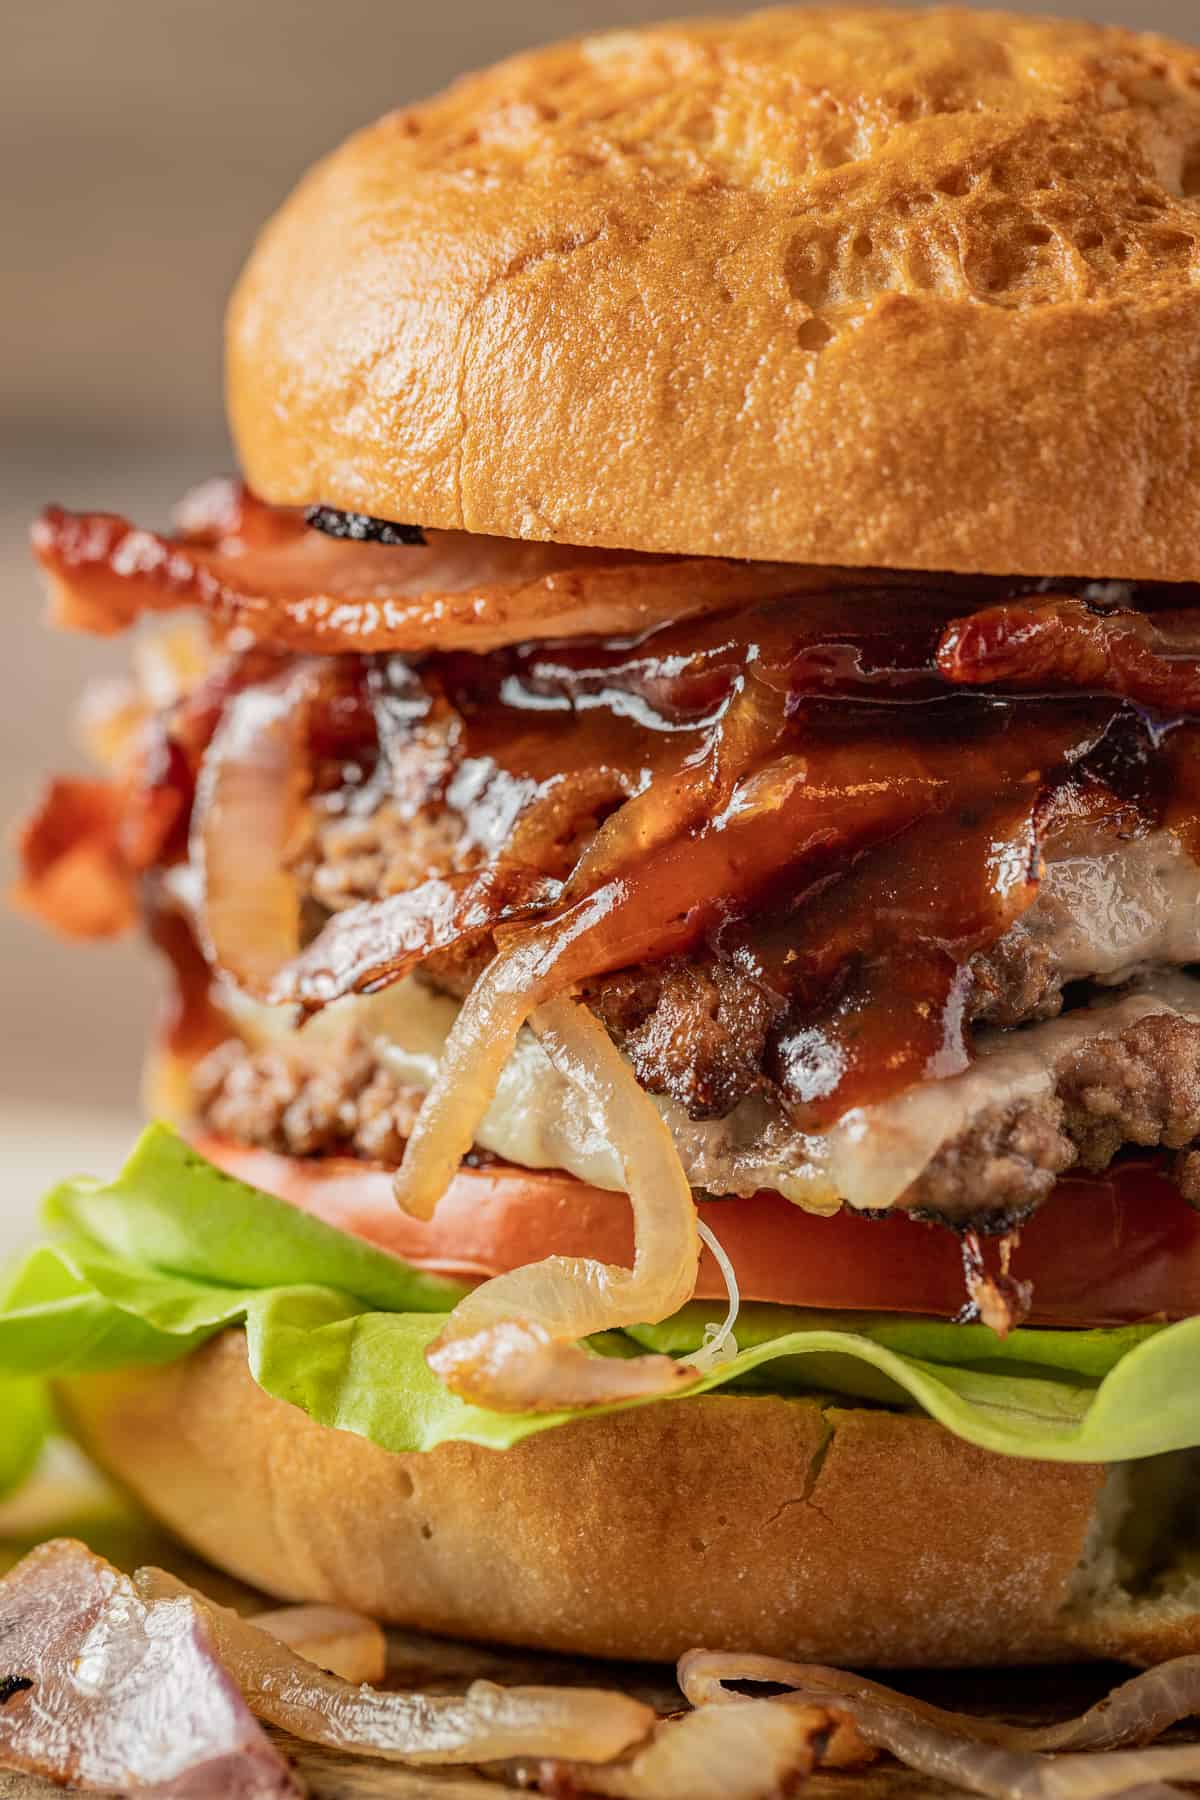 A close up view of two smash burger patties topped with cheese, bbq sauce, onions, and bacon on buns.